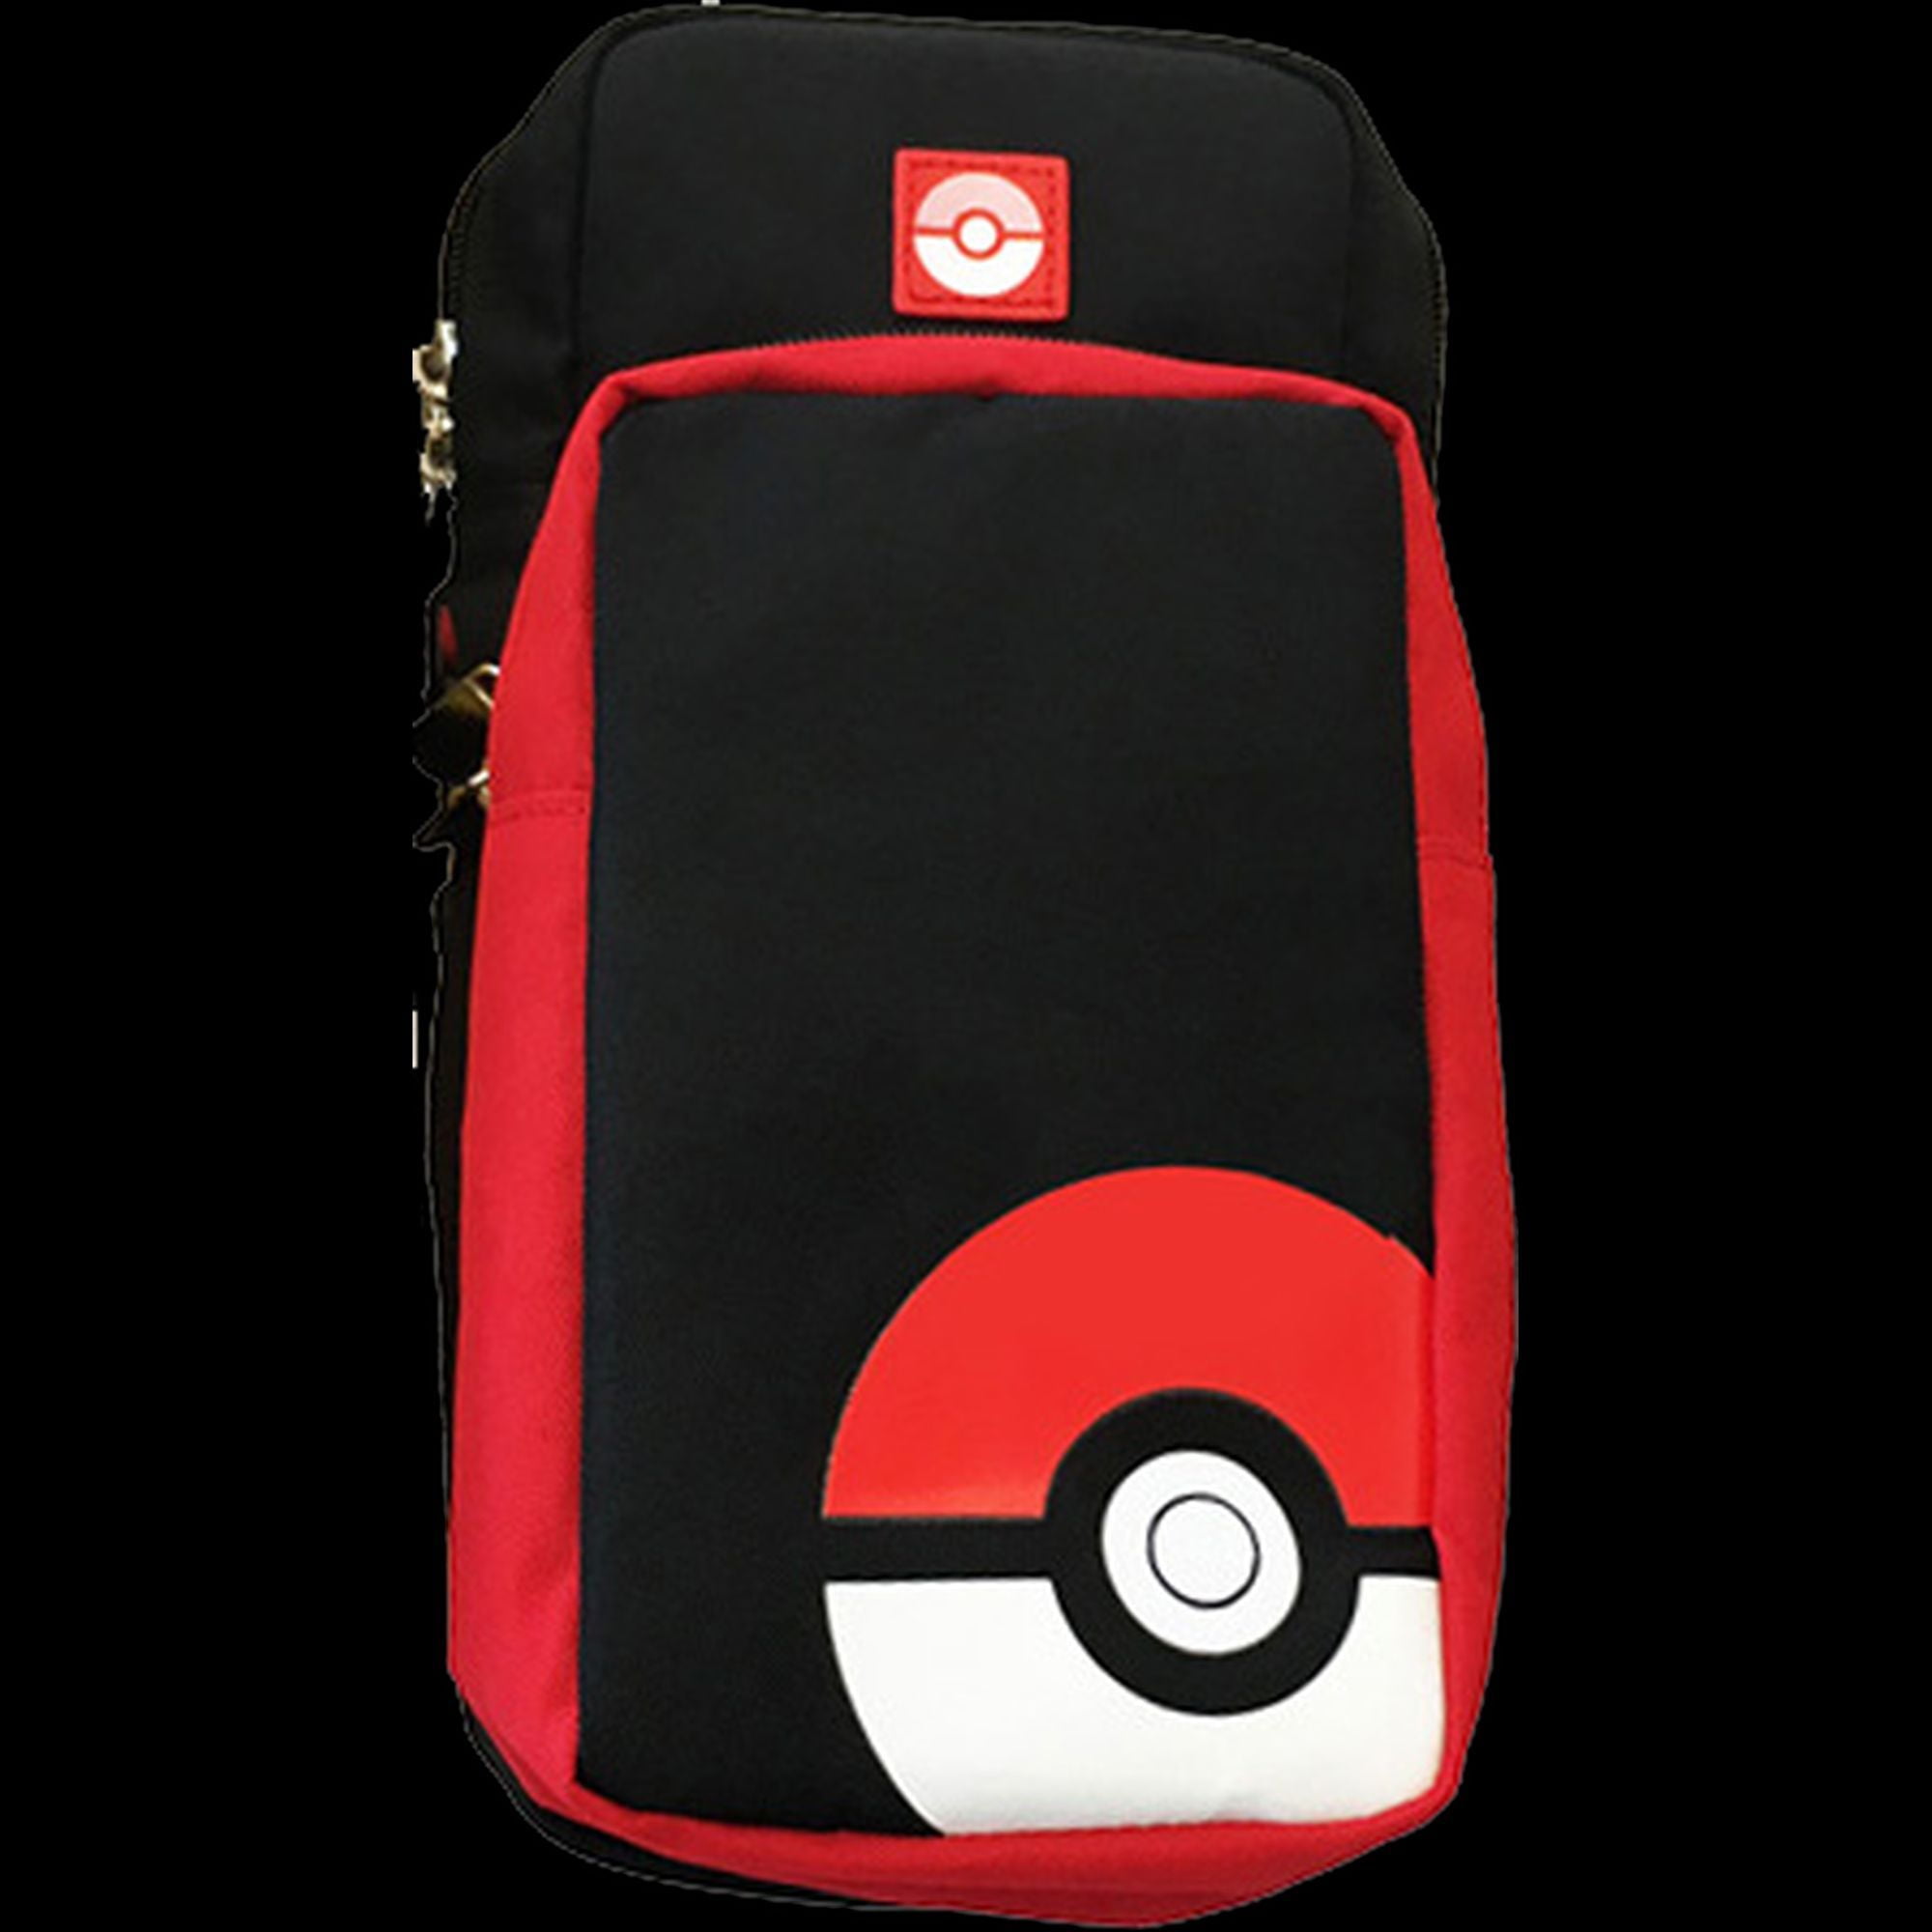 Nintendo Switch Adventure Pack (Poke Ball Edition) Bag by HORI - Officially Licensed by Nintendo Pokemon - Walmart.com